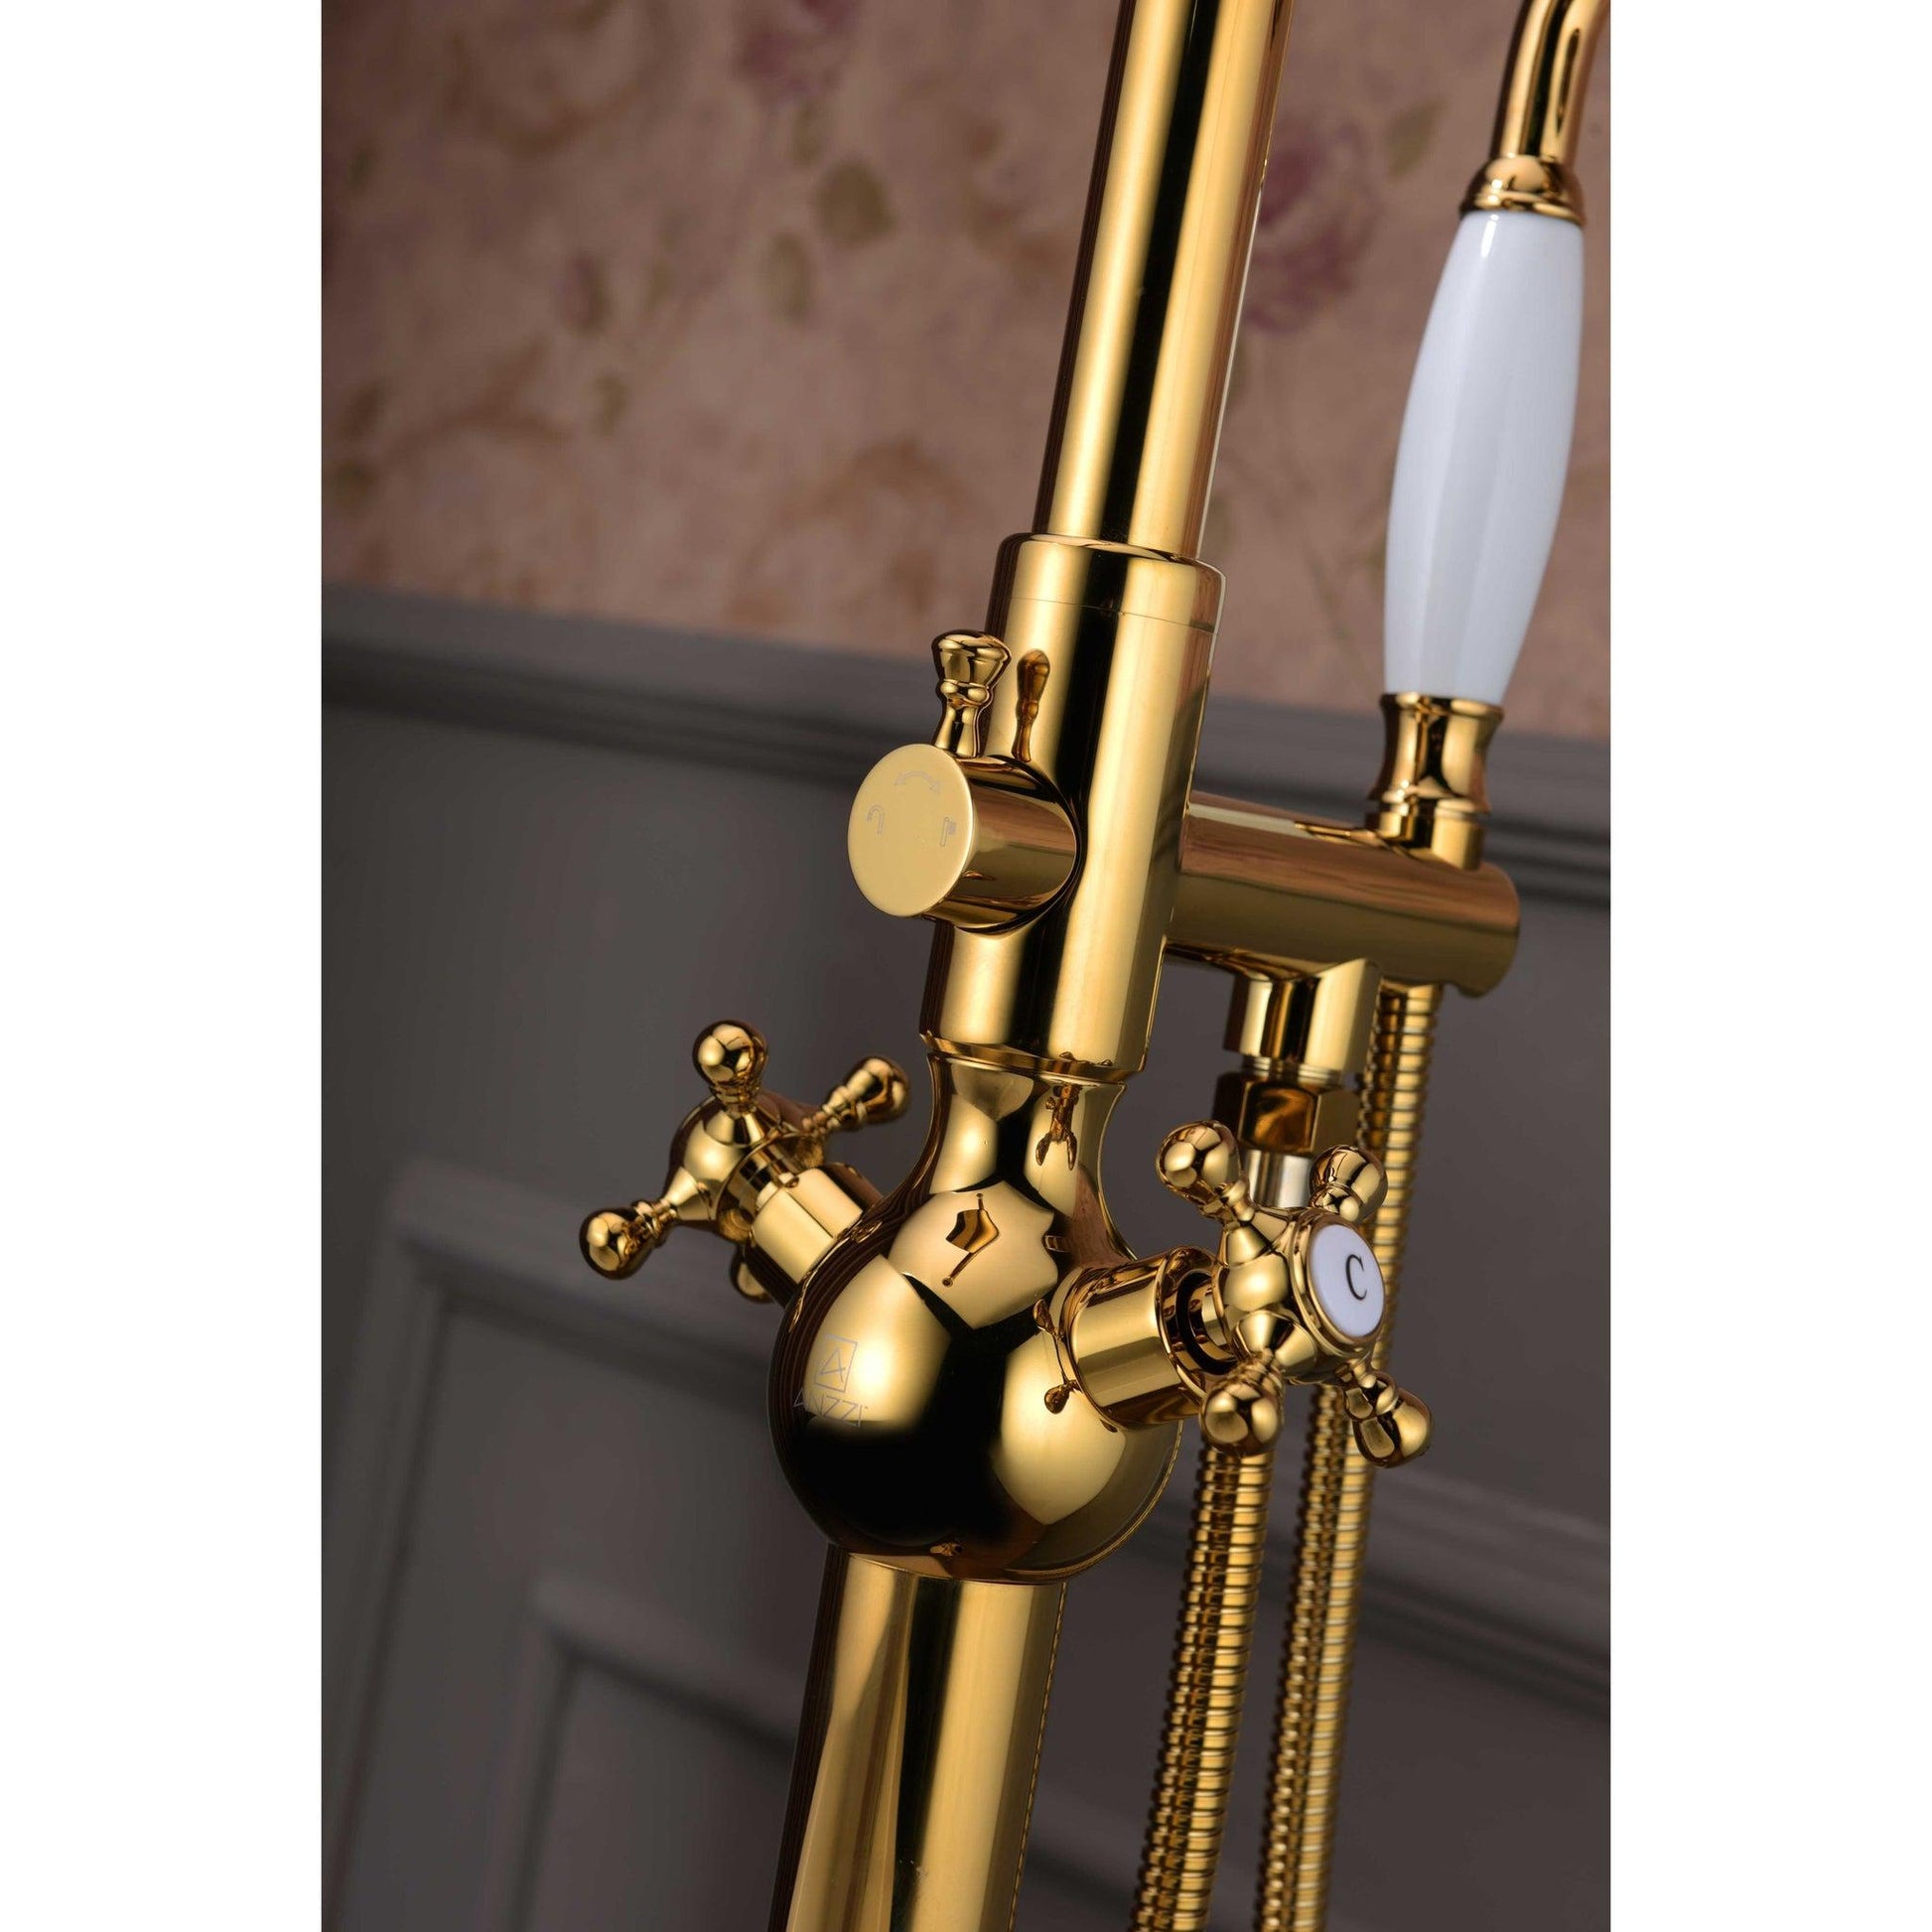 ANZZI Bridal Series 3-Handle Gold Clawfoot Tub Faucet With Euro-Grip Handheld Sprayer